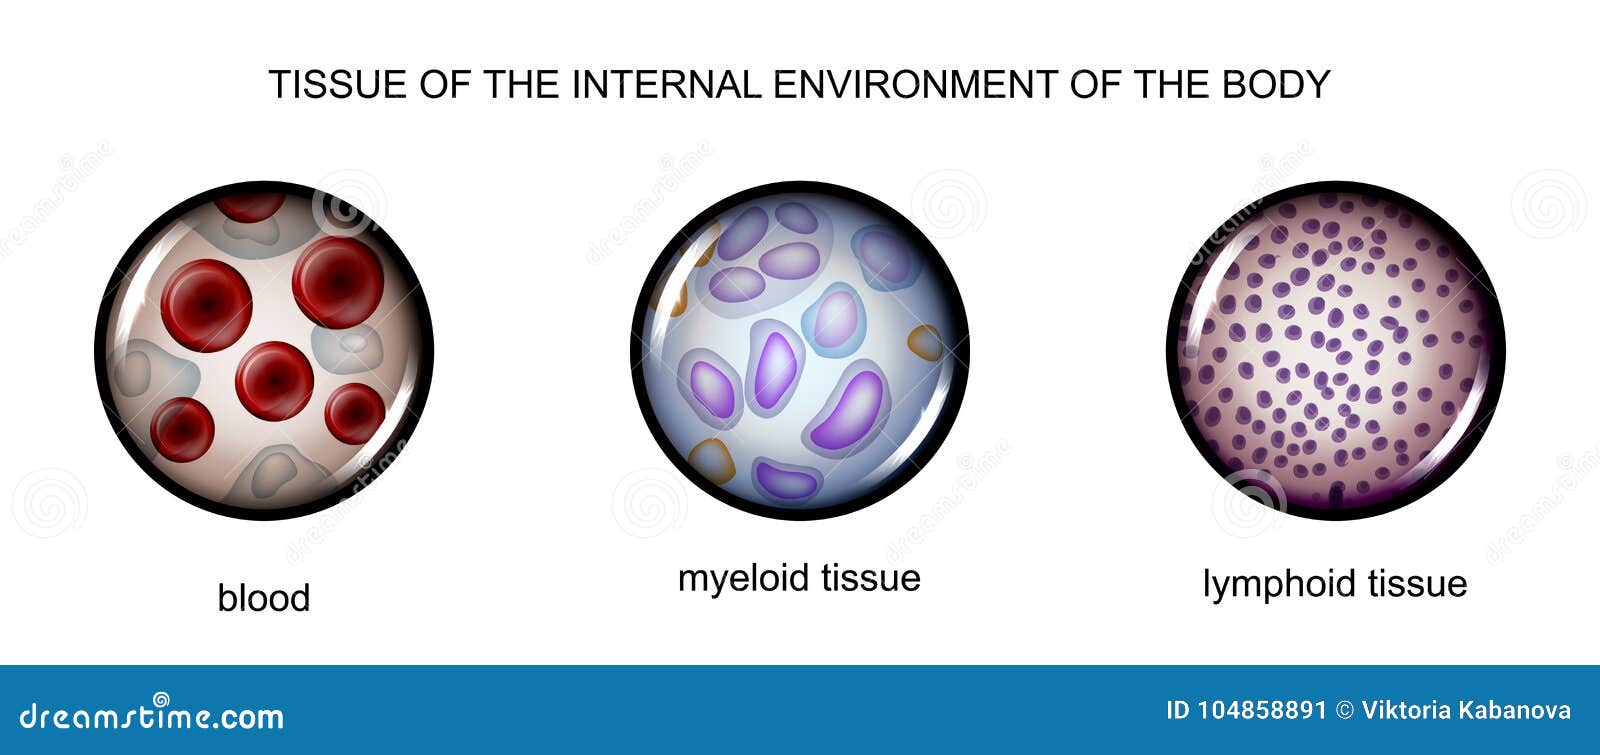 tissues of the internal environment: blood, lymph, tissue myelin